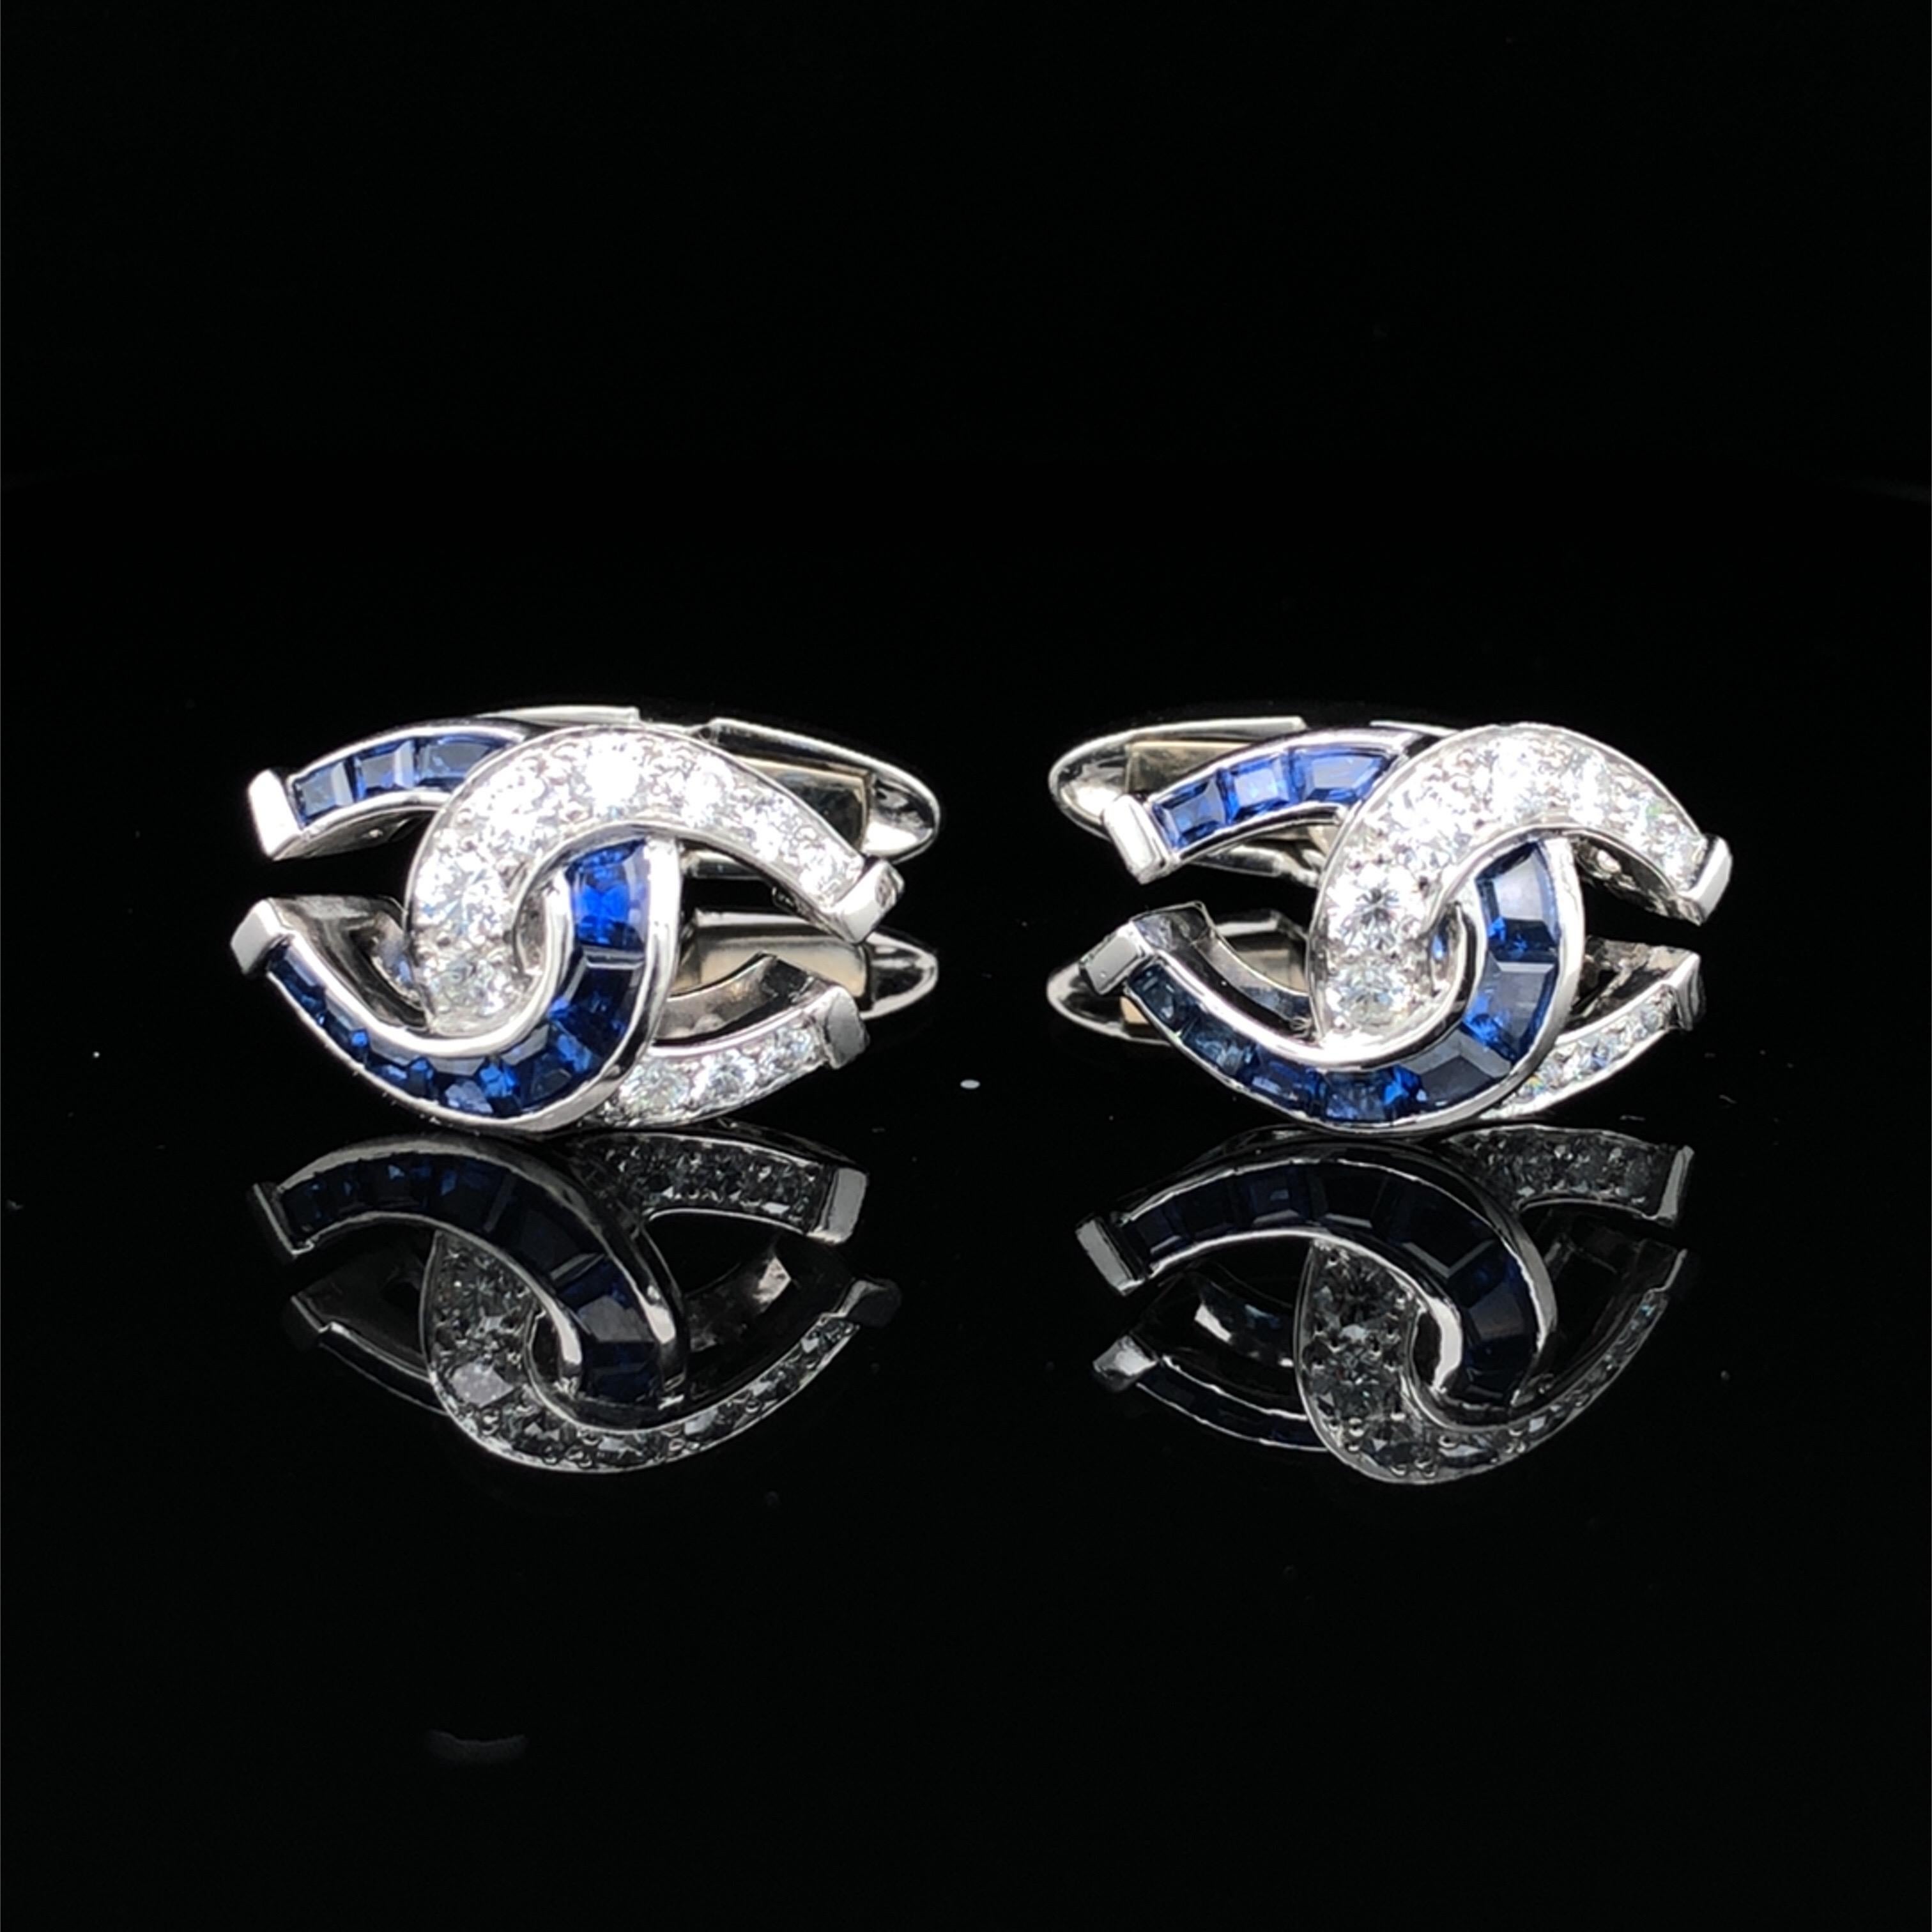 These Oscar Heyman horseshoe cufflinks are made in platinum and set with 20 square sapphires (1.79cts) and 20 round diamonds (0.90cts, F-G/ VS). The sapphires are cut by hand at Oscar Heyman's Madison Avenue workshop in New York City by our